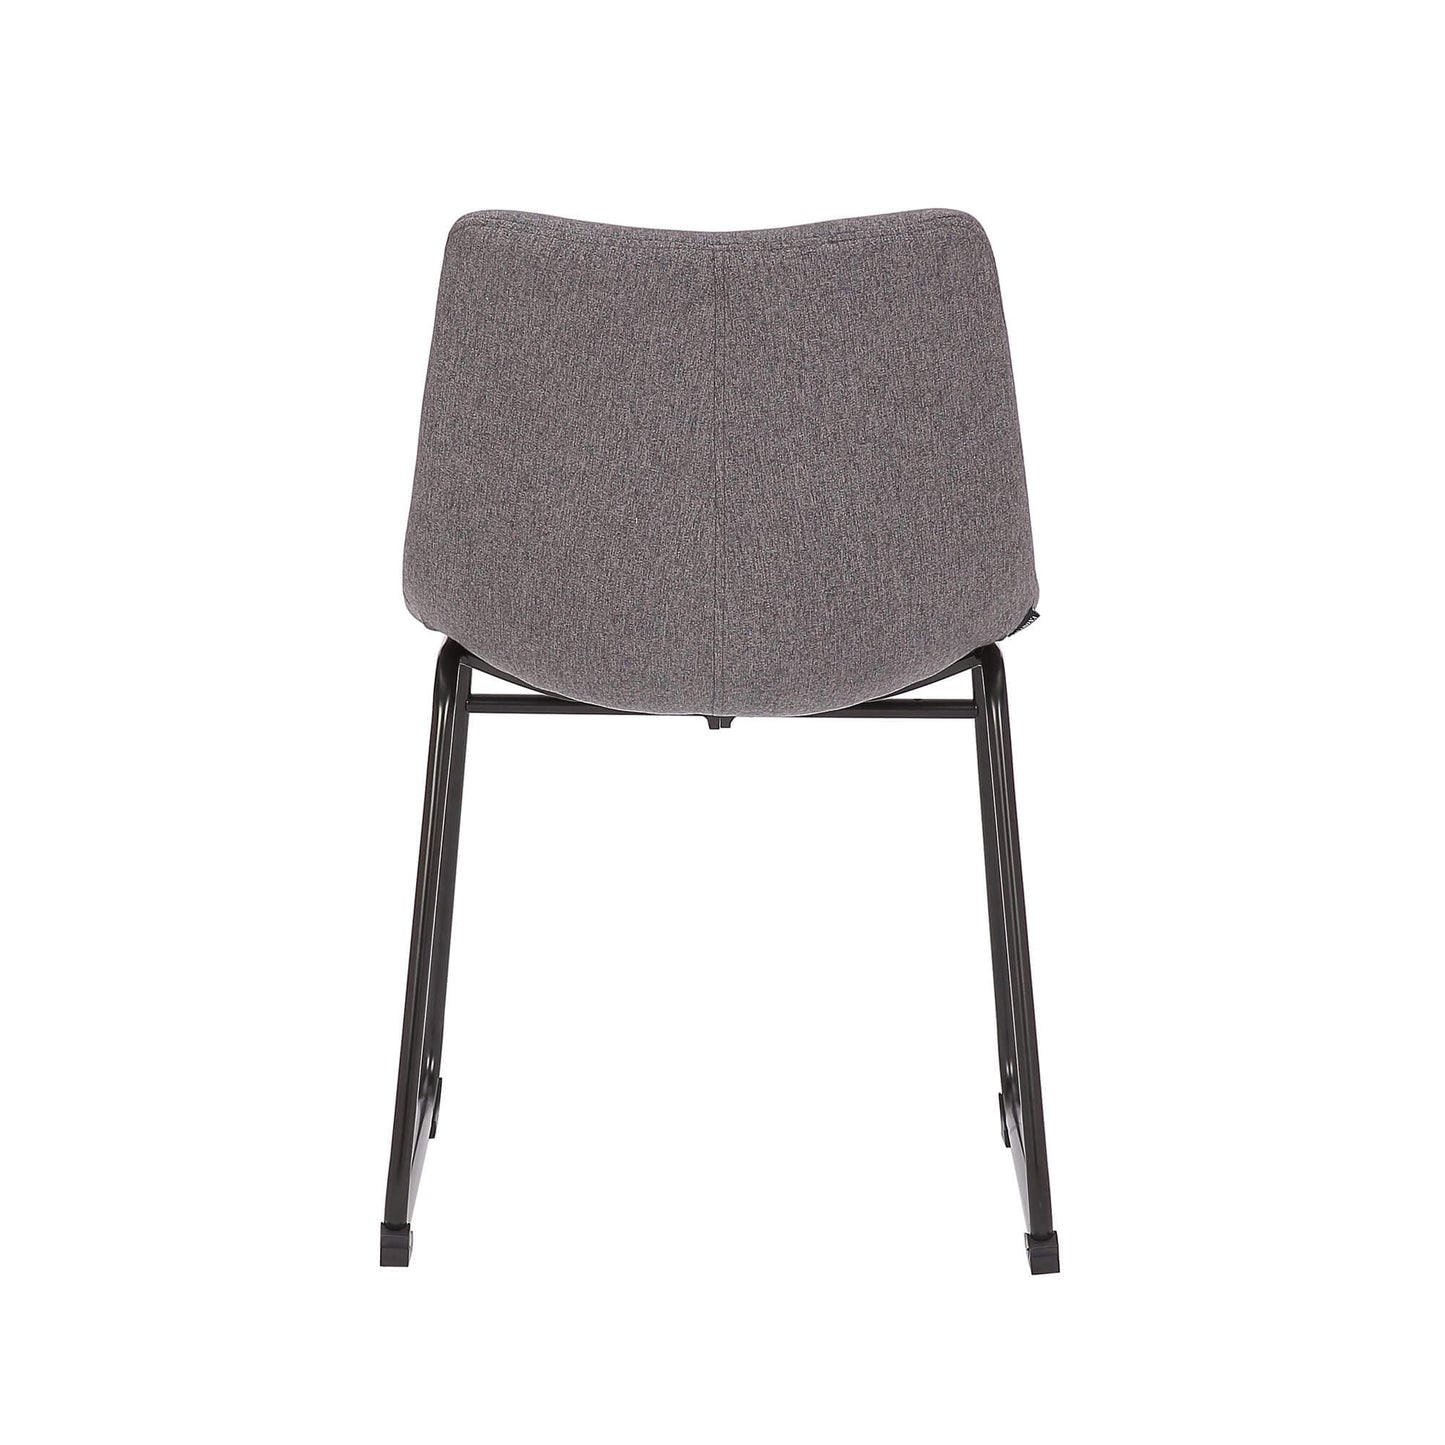 Rothbury | Commercial Stain Resistant Waterproof Fabric Dining Chairs | Set Of 2 | Dark Grey